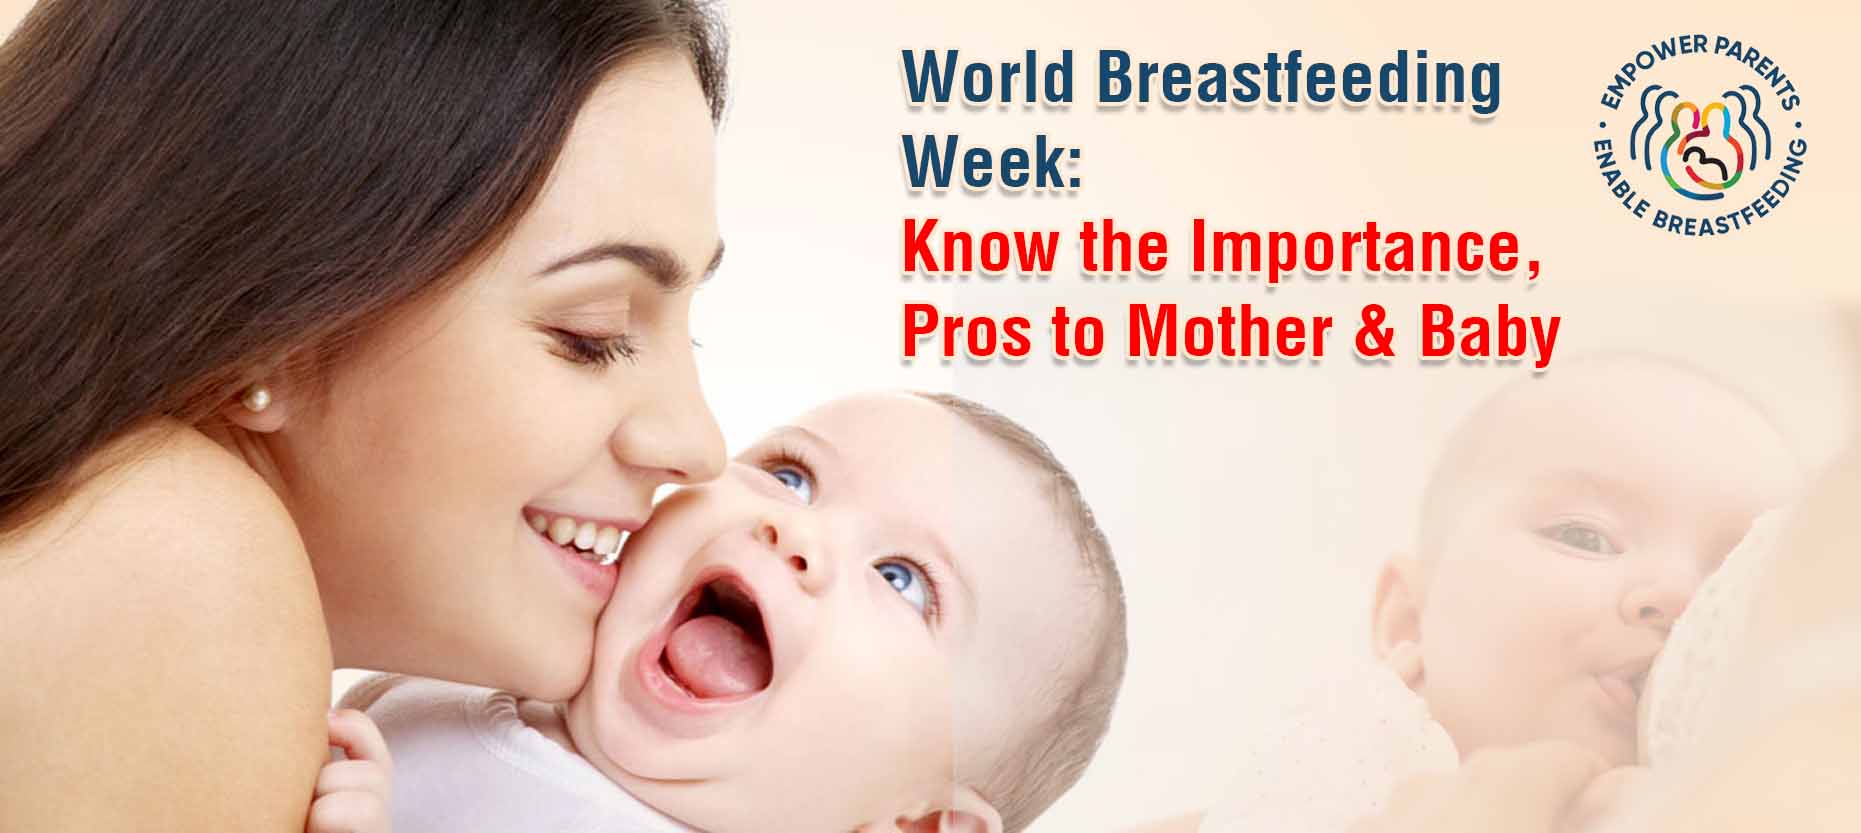 World Breastfeeding Week: Know the Importance, Pros to Mother & Baby